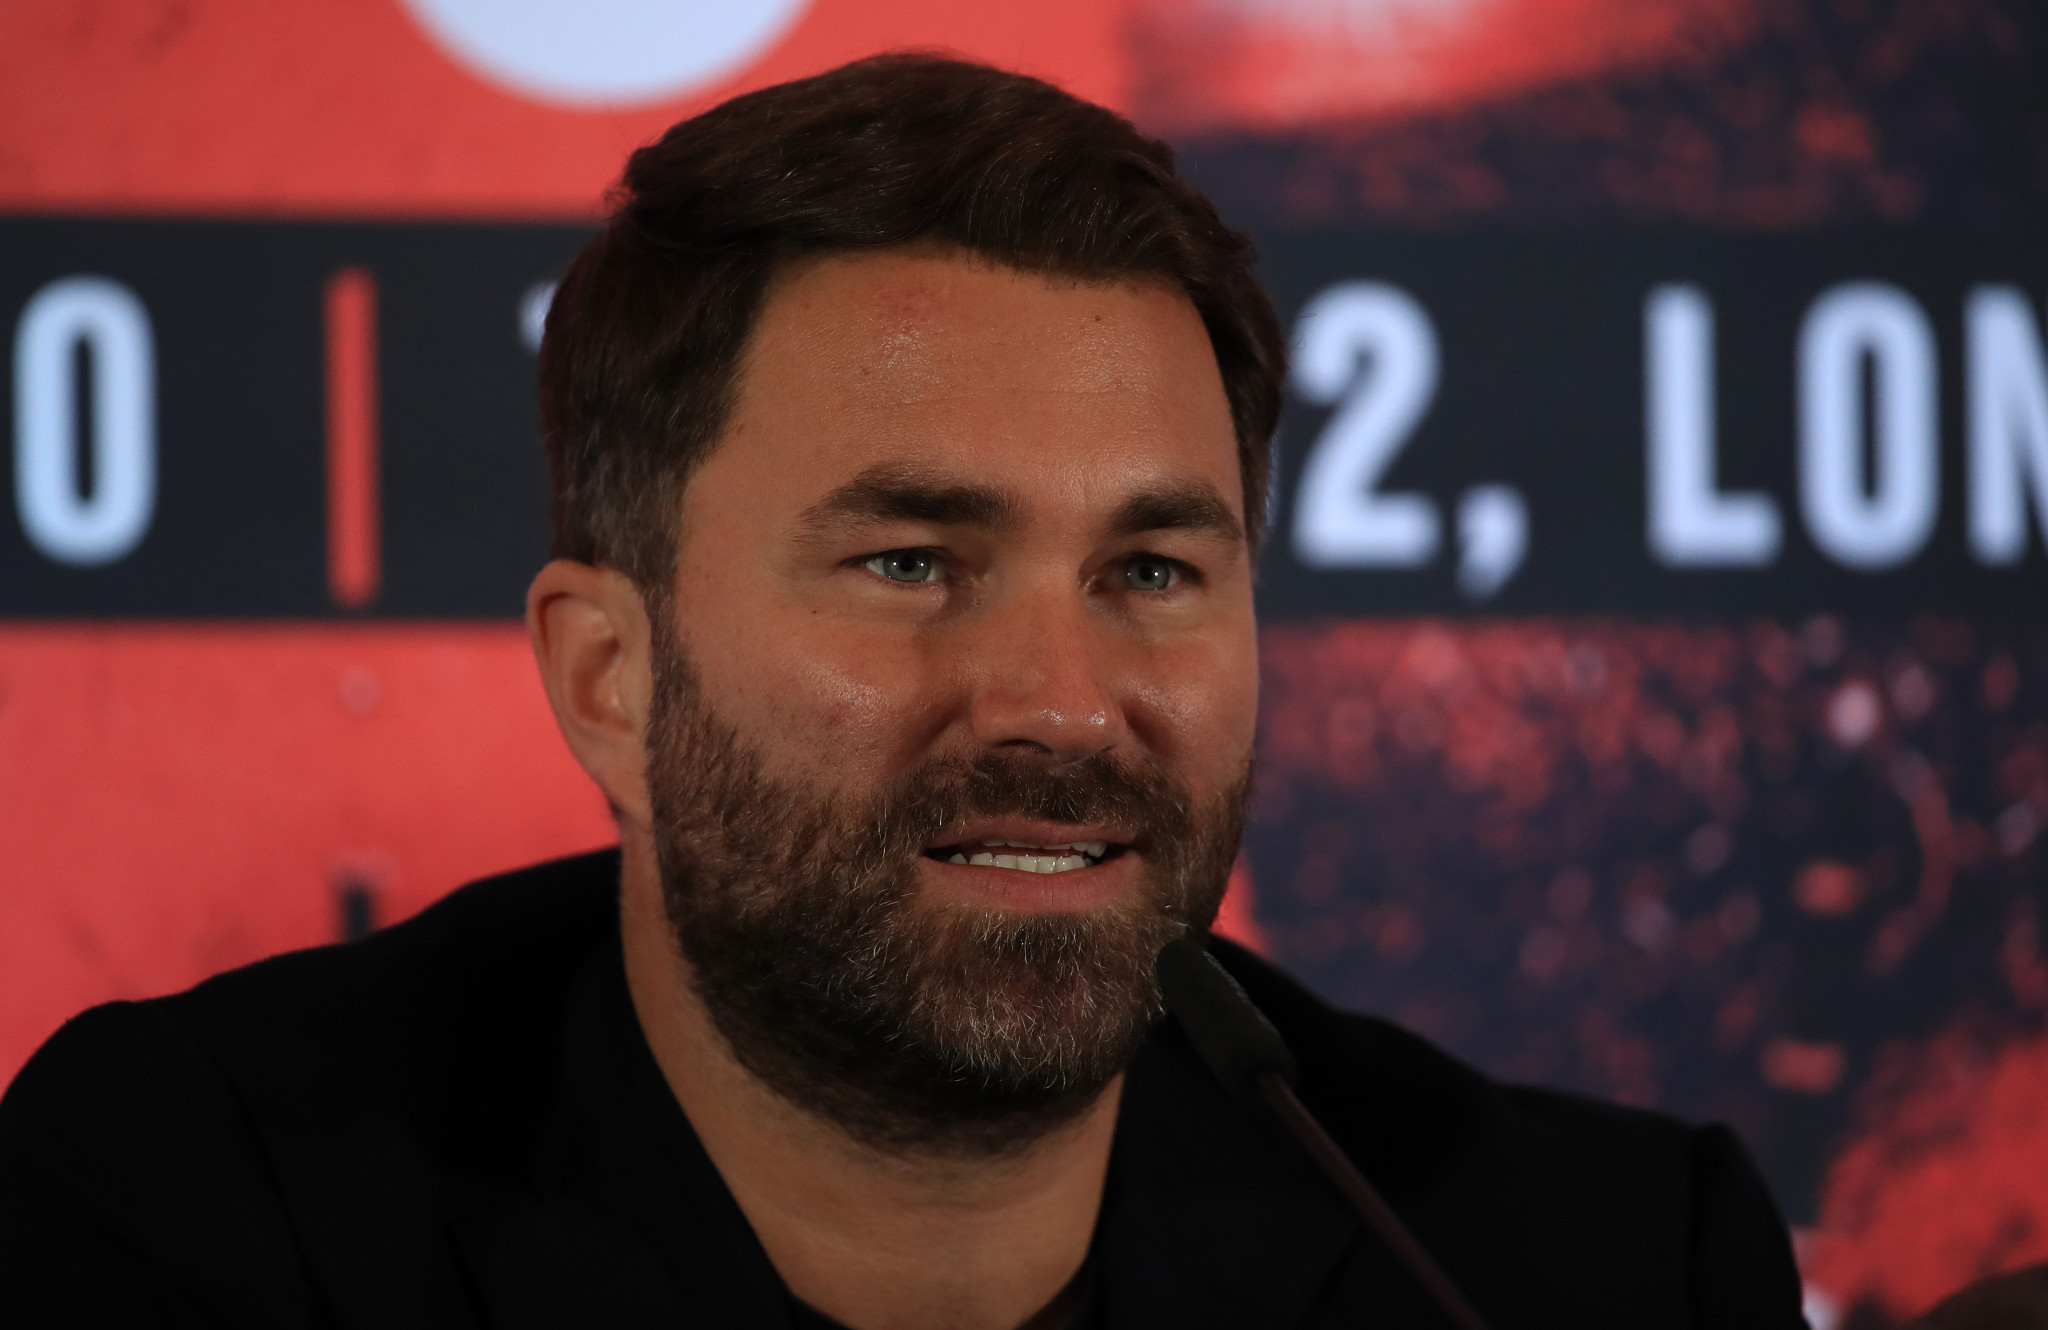 Promoter Eddie Hearn will be showcasing a card of boxing in the family garden in August ©Getty Images